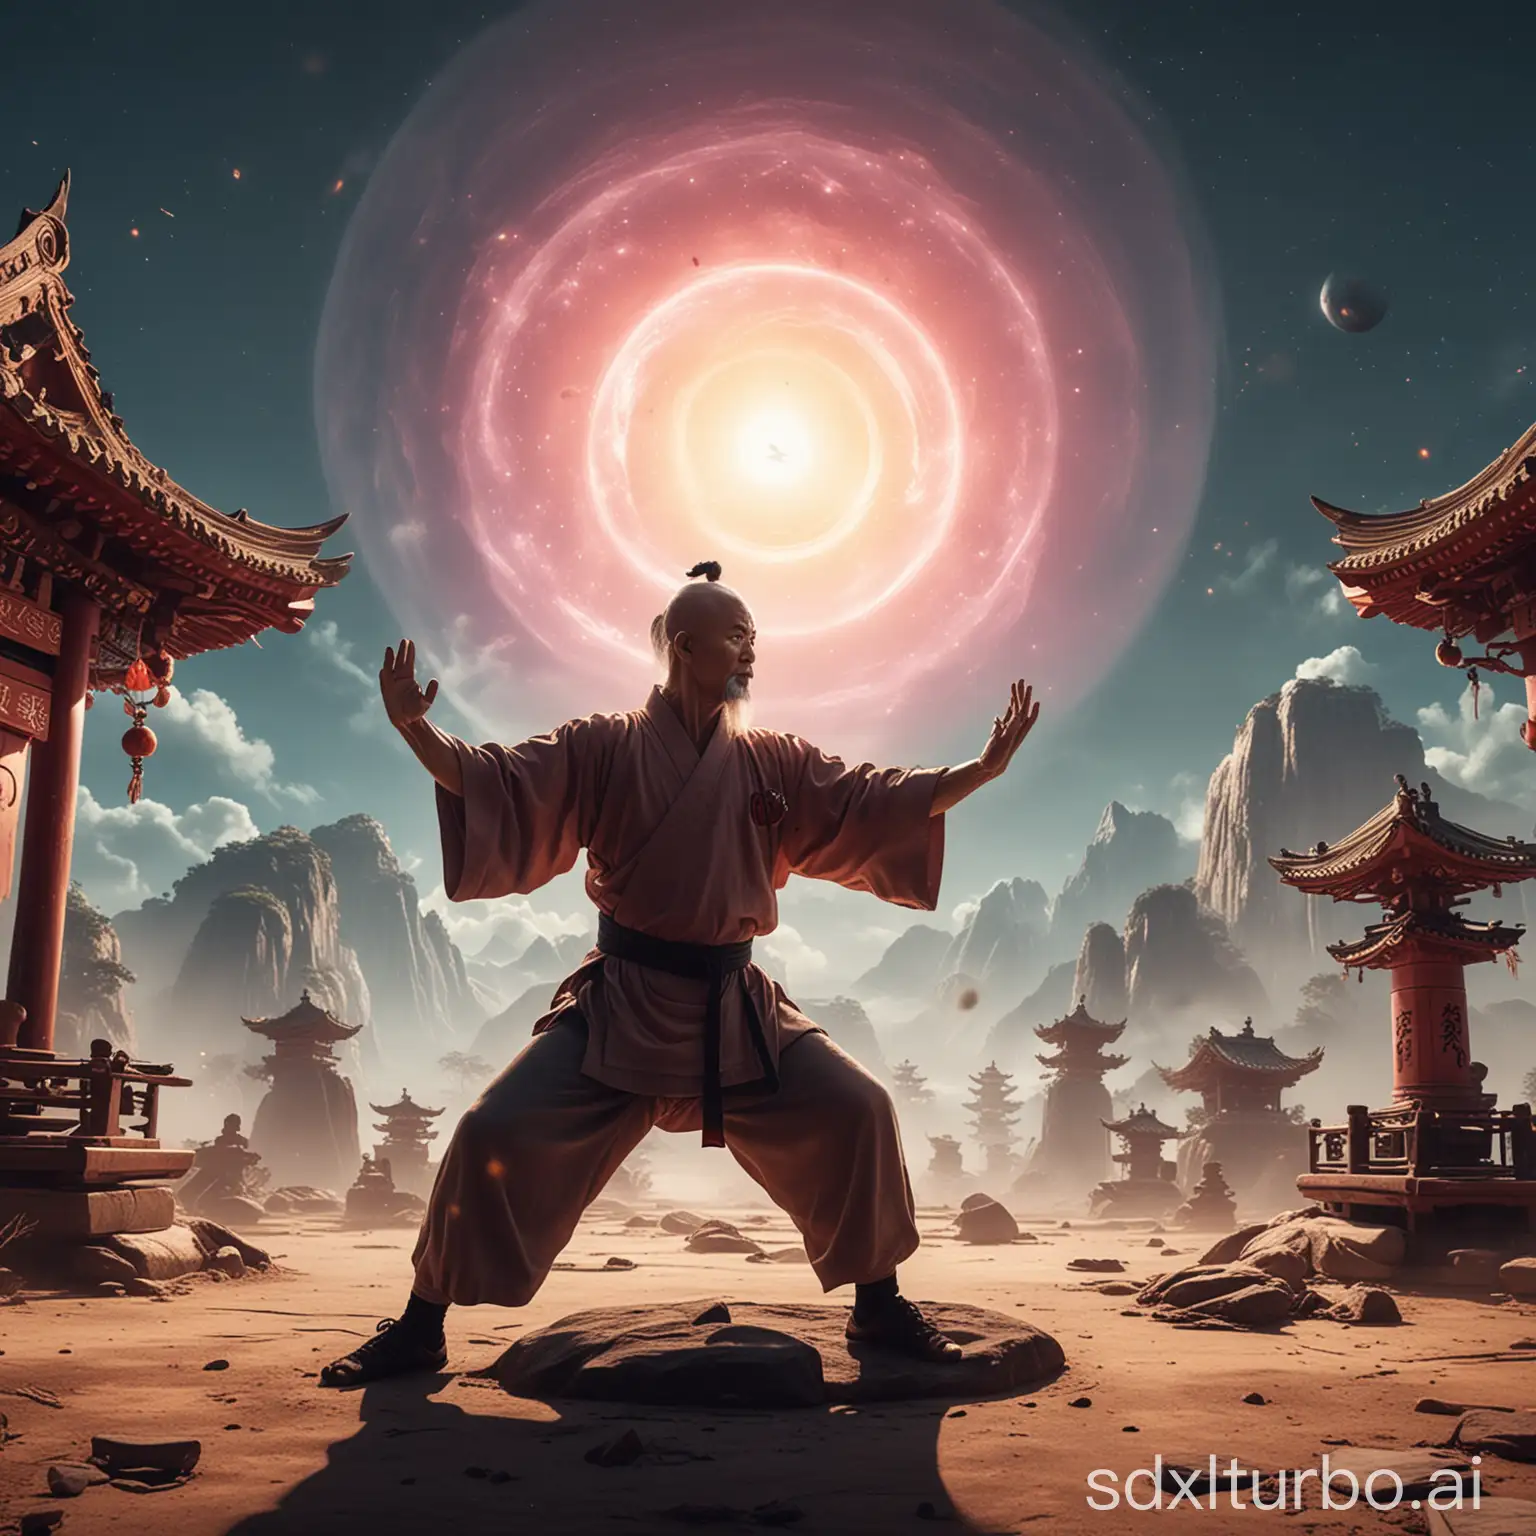 A kung fu grandmaster surrounded by a mystical aura stands on a planet that looks like a dojo. He trains with his student, lifting crushed weights.